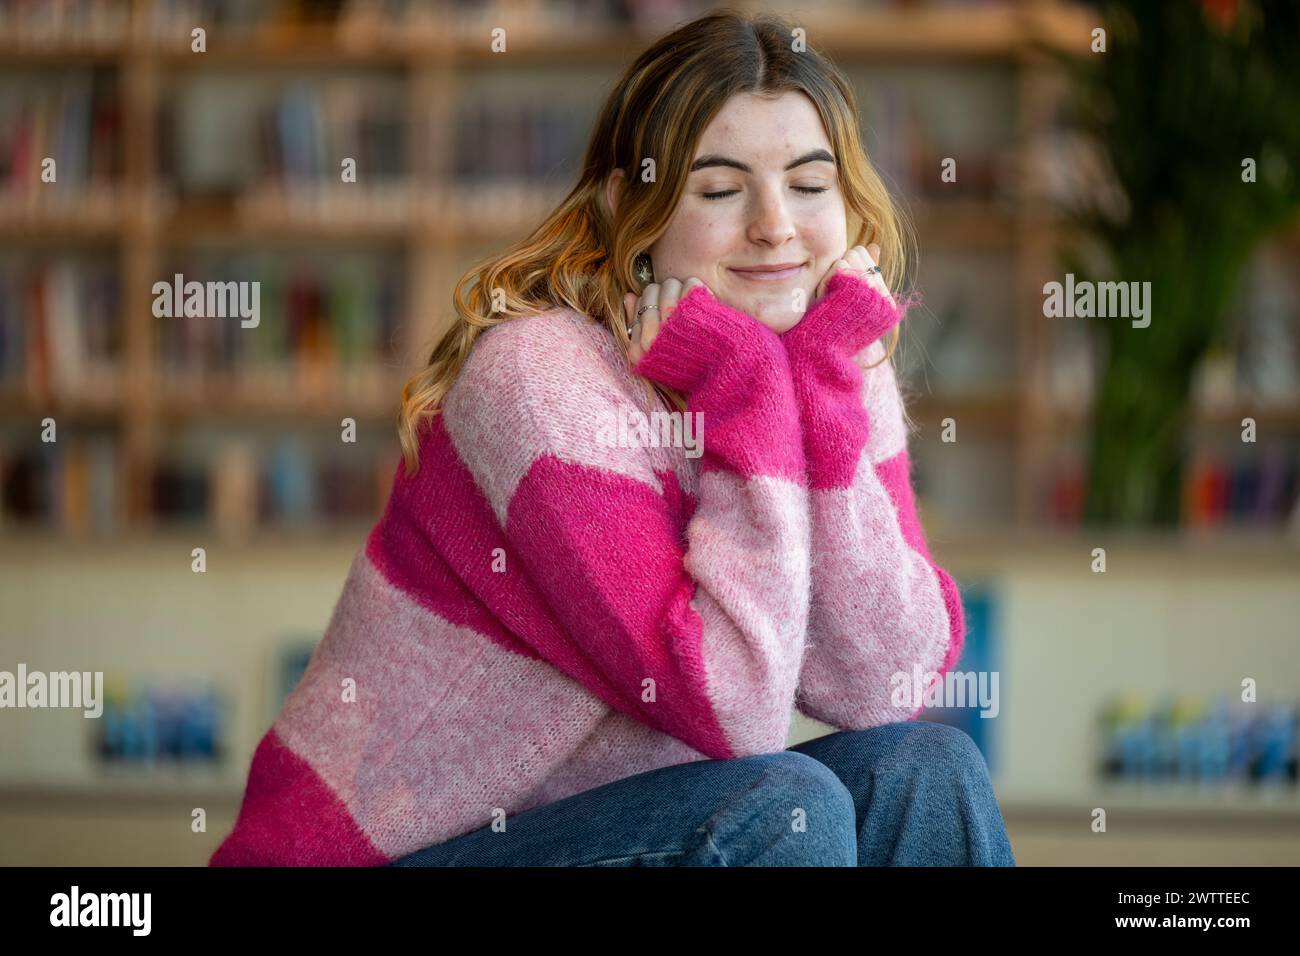 Young woman smiling and daydreaming in a cozy library setting Stock Photo